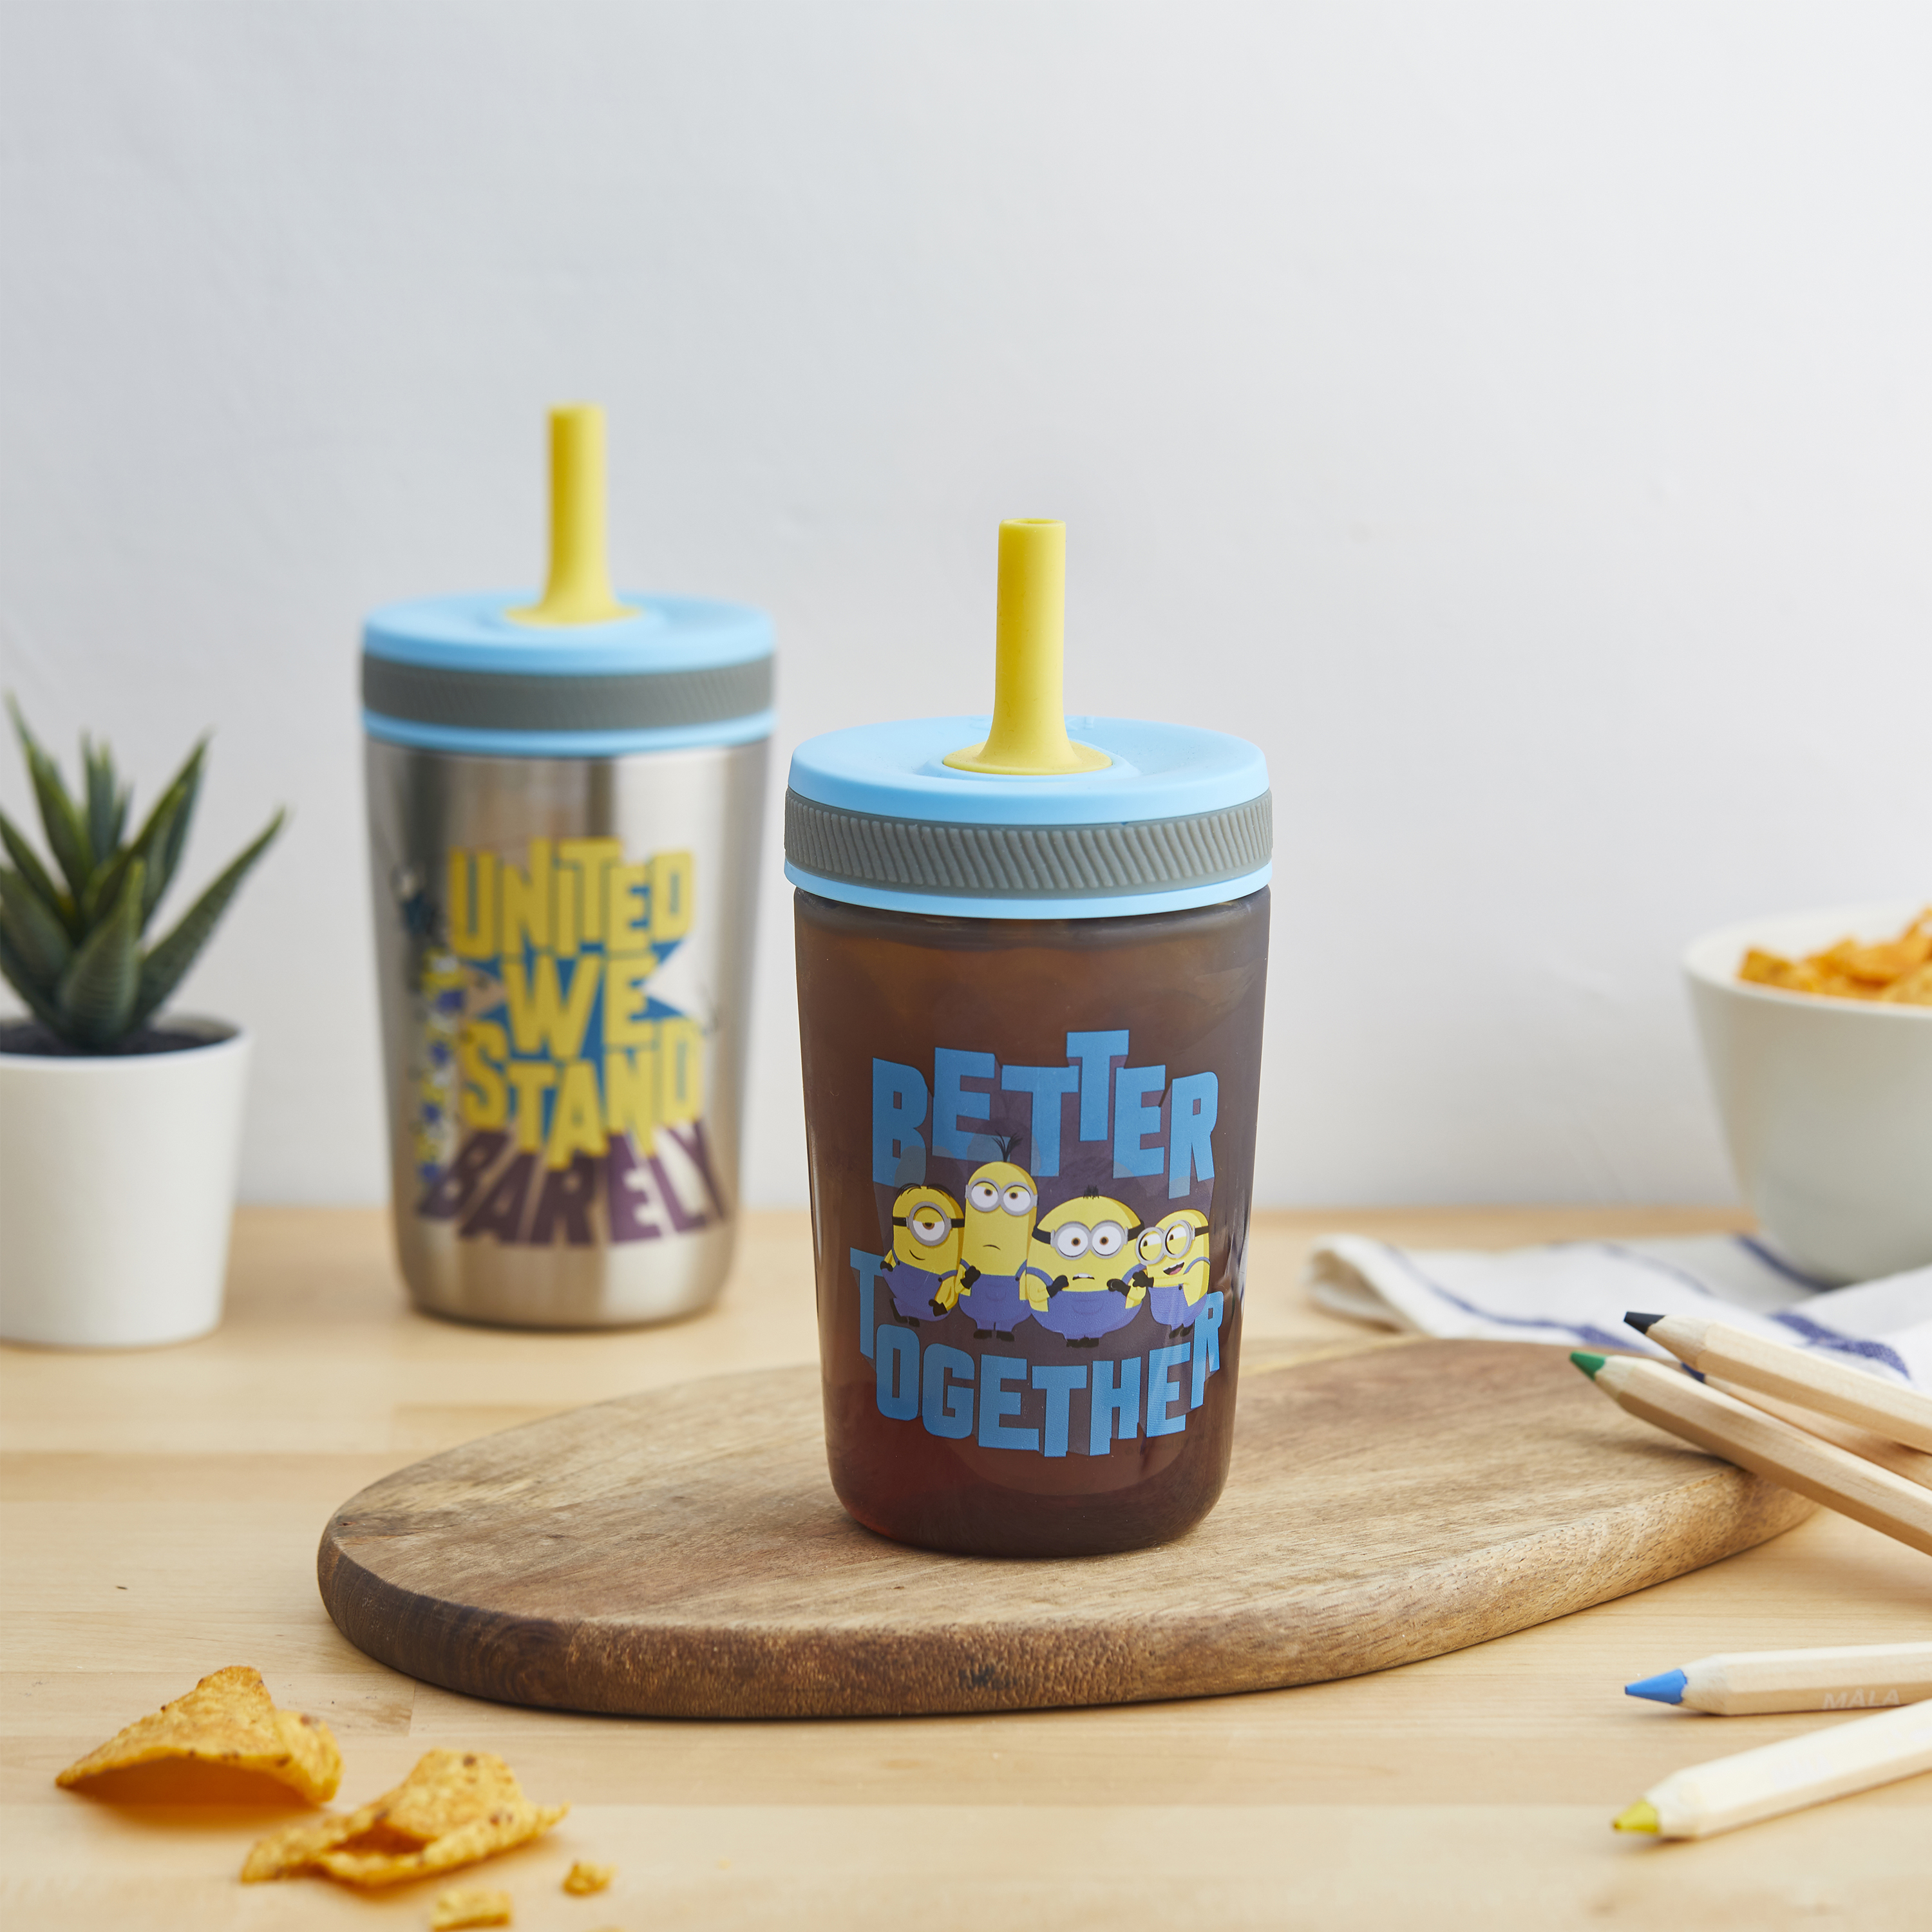 Minions 2 Movie 15  ounce Plastic Tumbler, Minions - Better Together, 3-piece set slideshow image 5